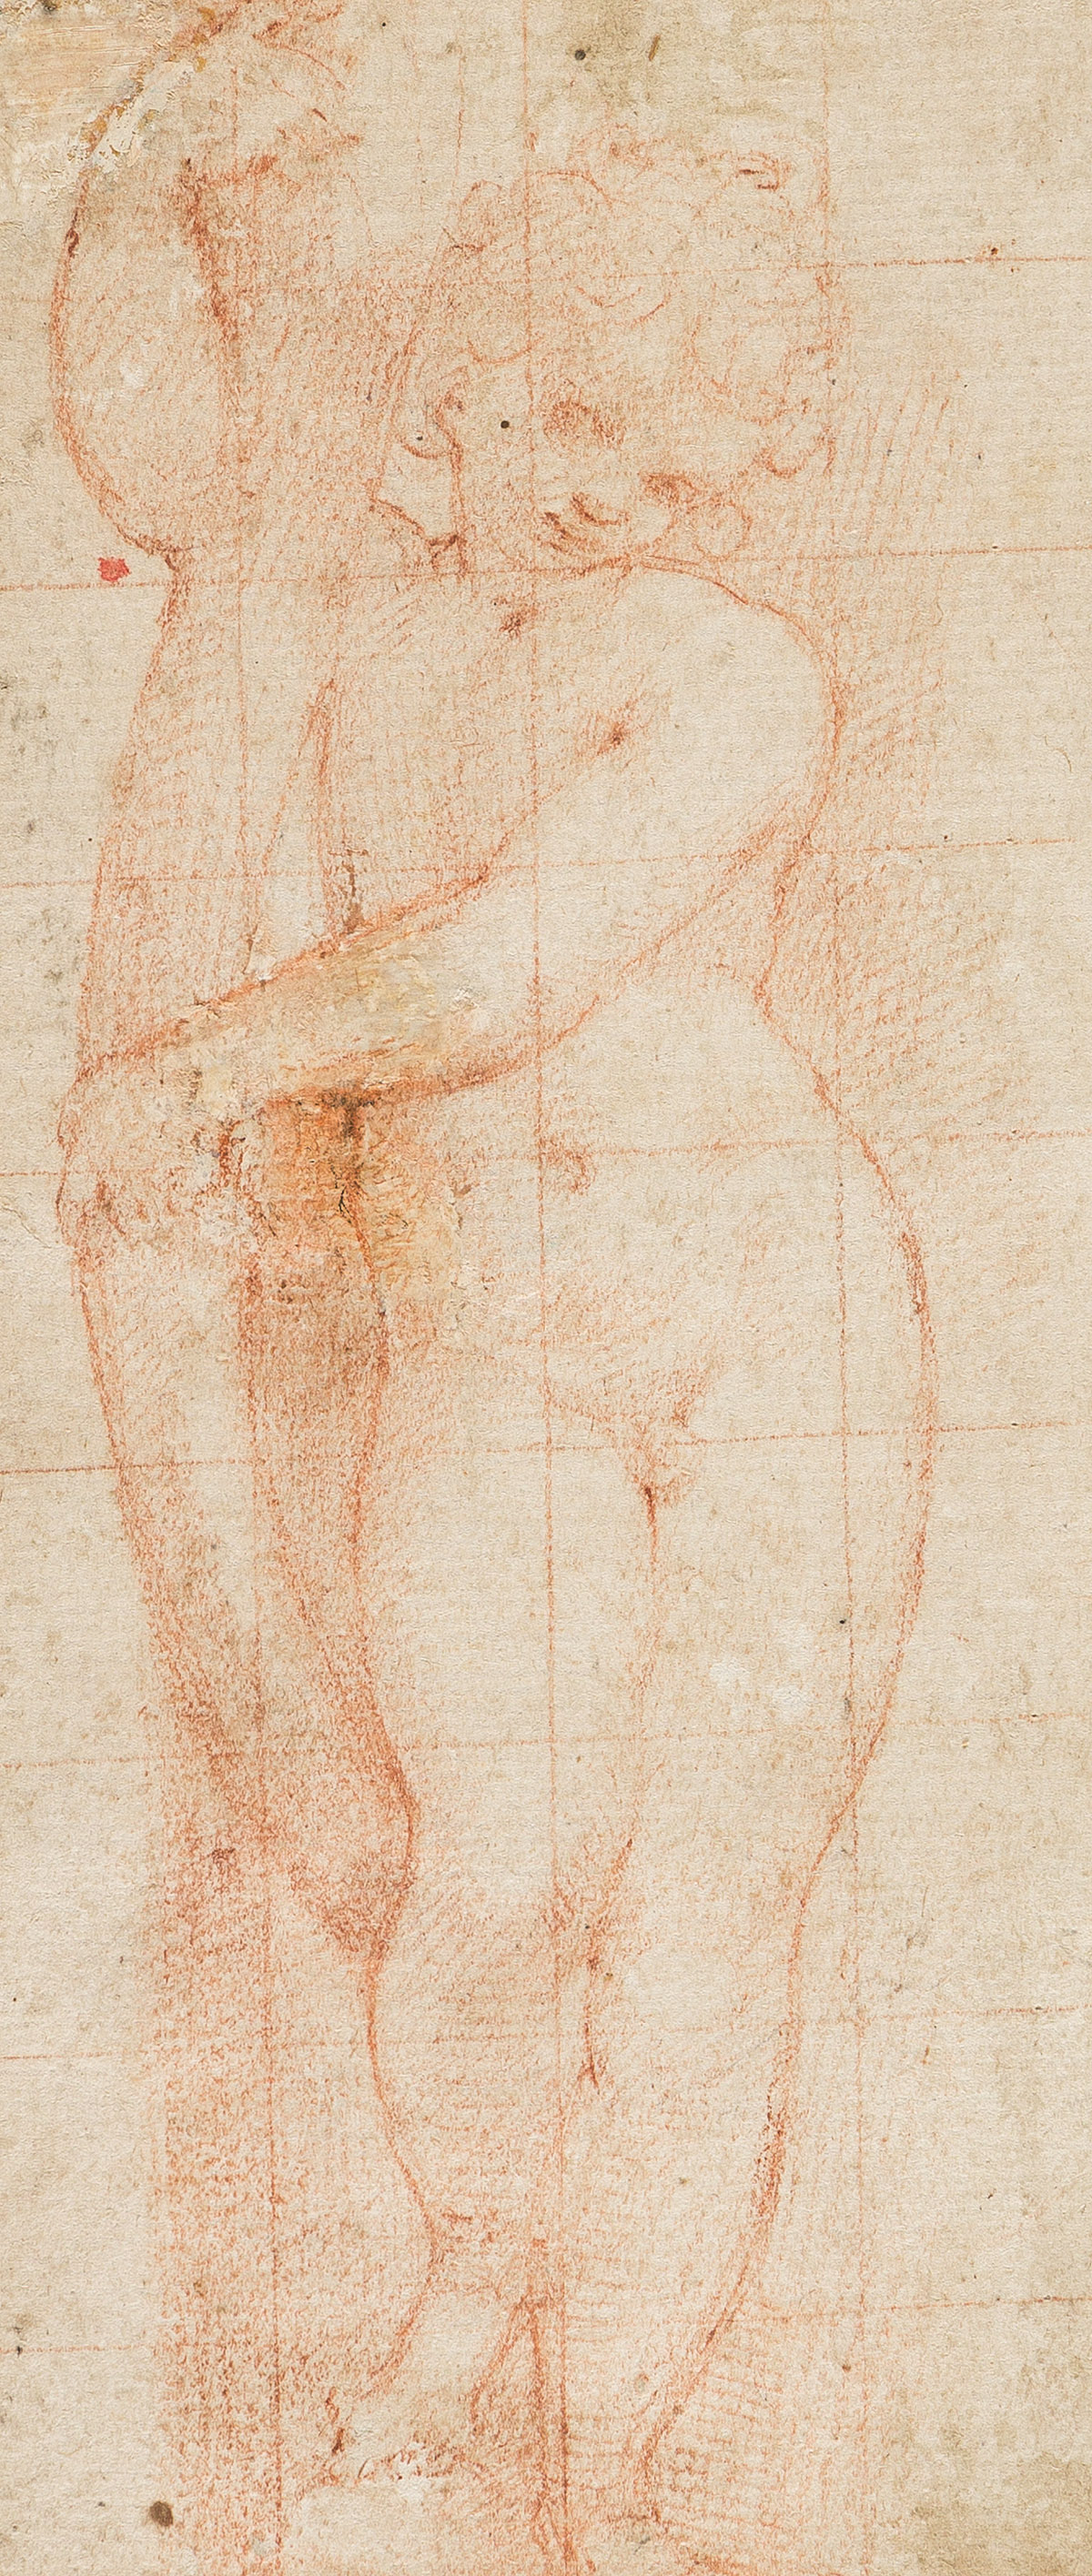 ITALIAN SCHOOL, 16TH CENTURY A Young Standing Male Nude.